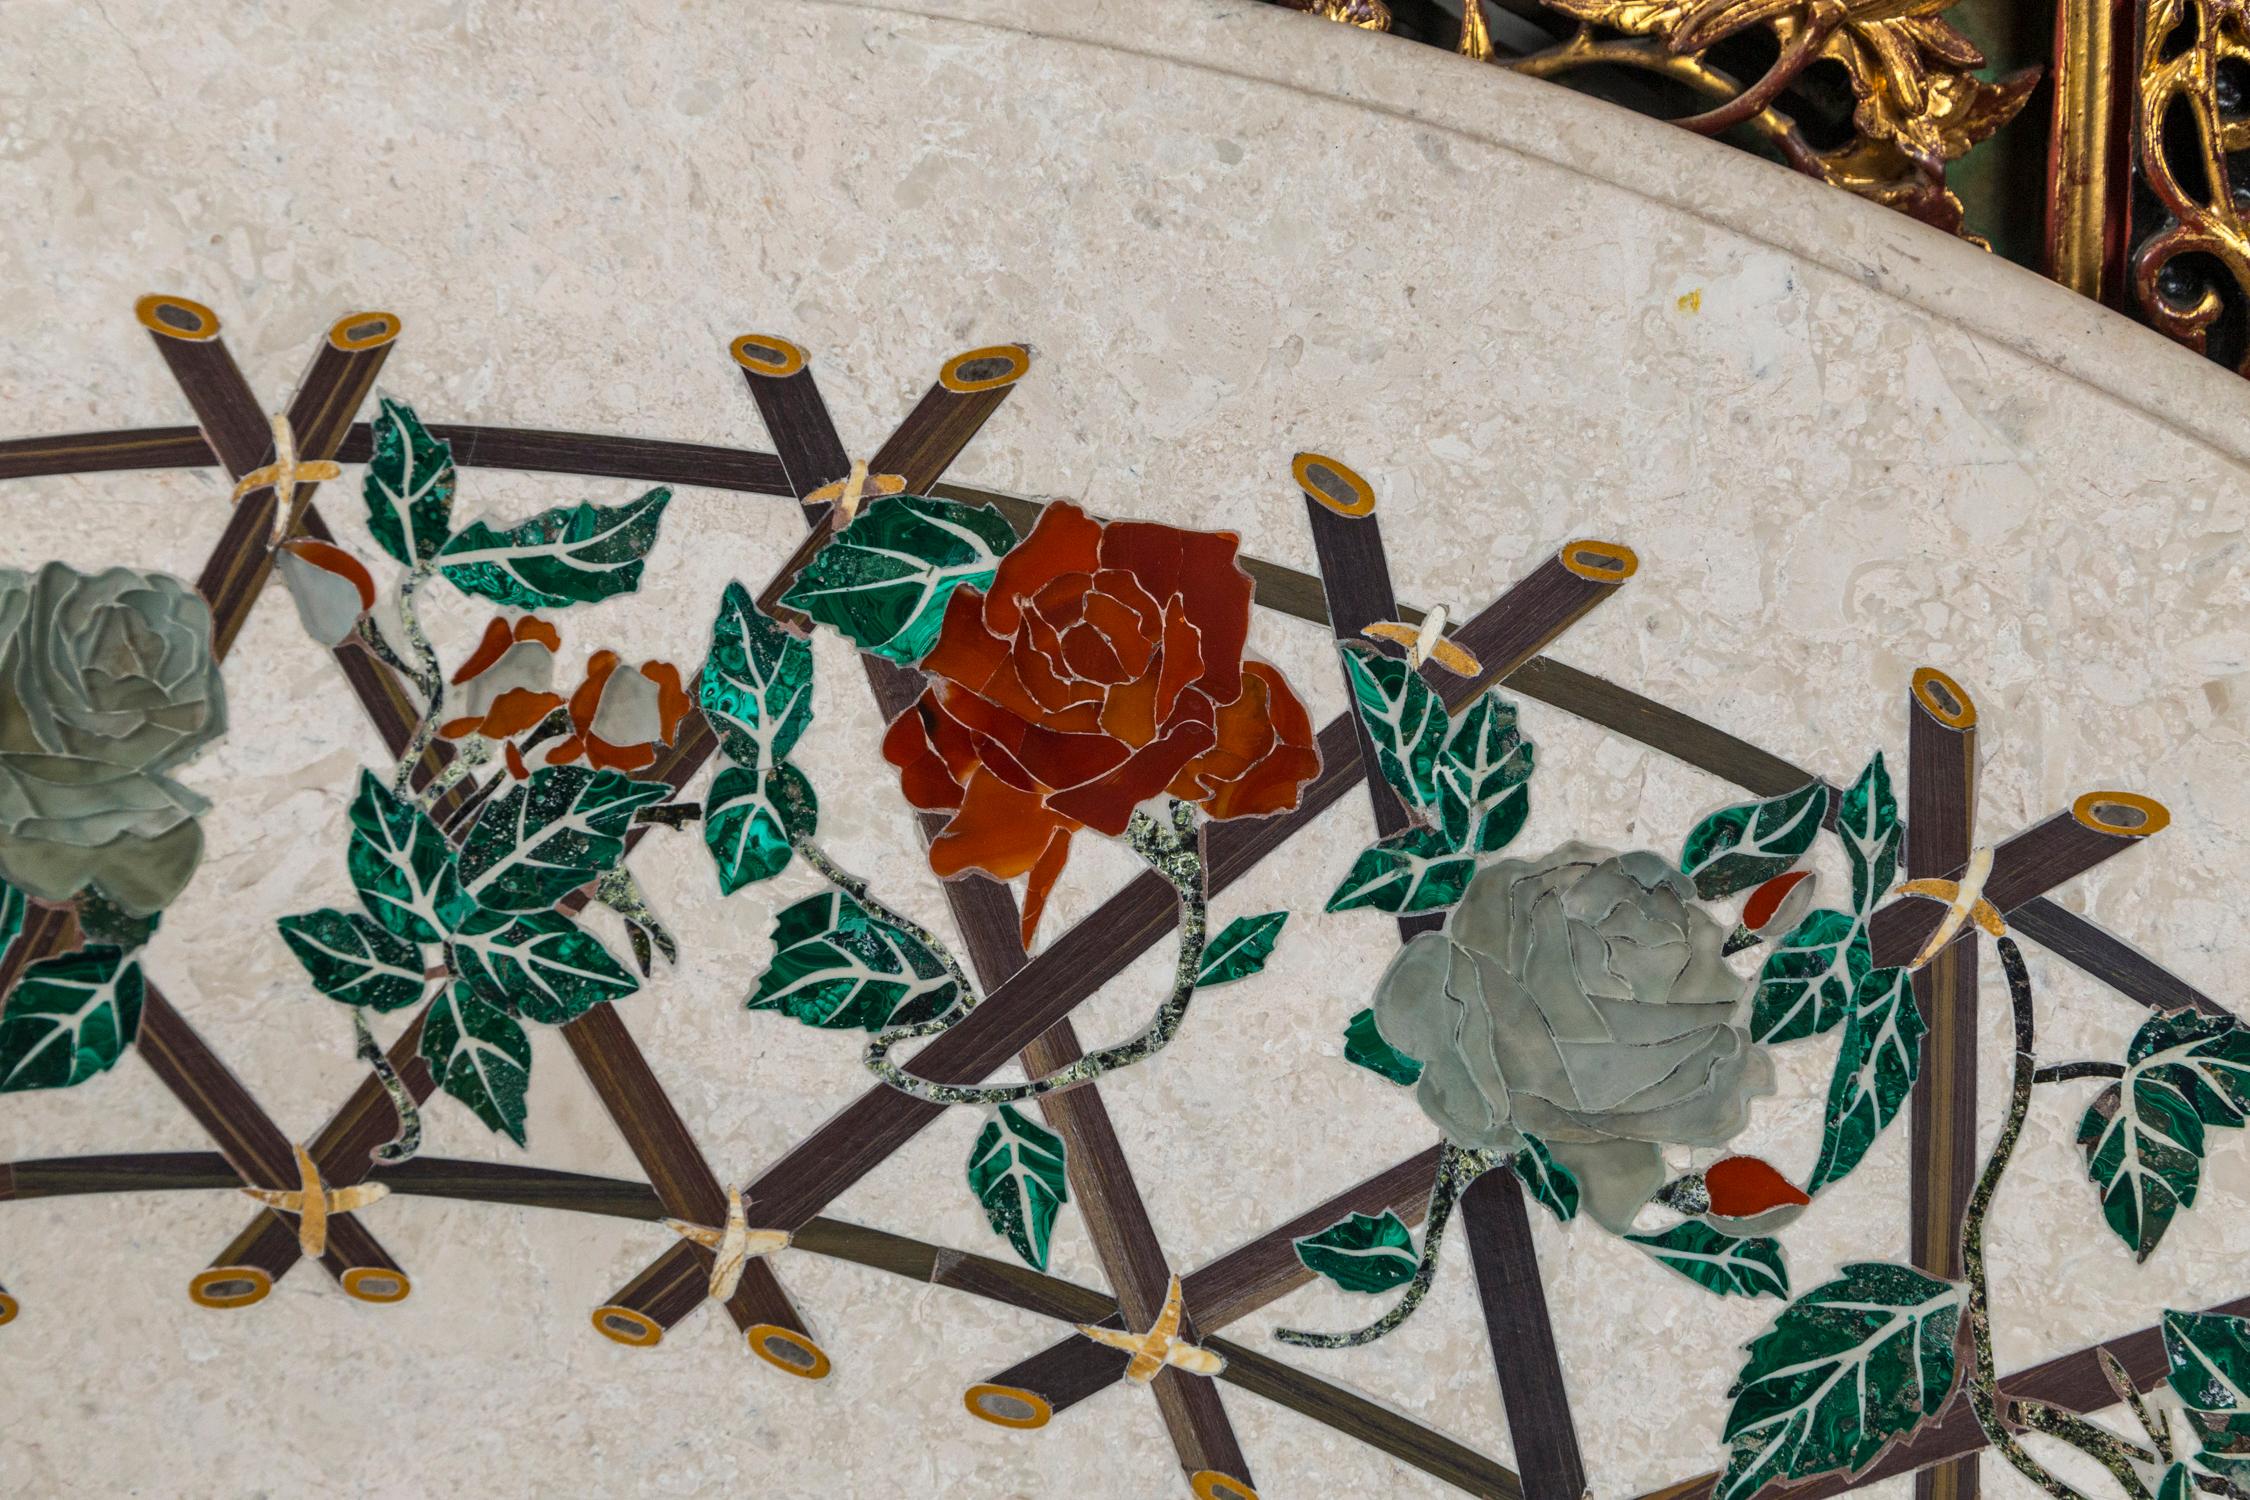 The white ground marble inlaid with 2 concentric circles of reddish flowers, green leaves and a criss cross lattice work. Measure: 48